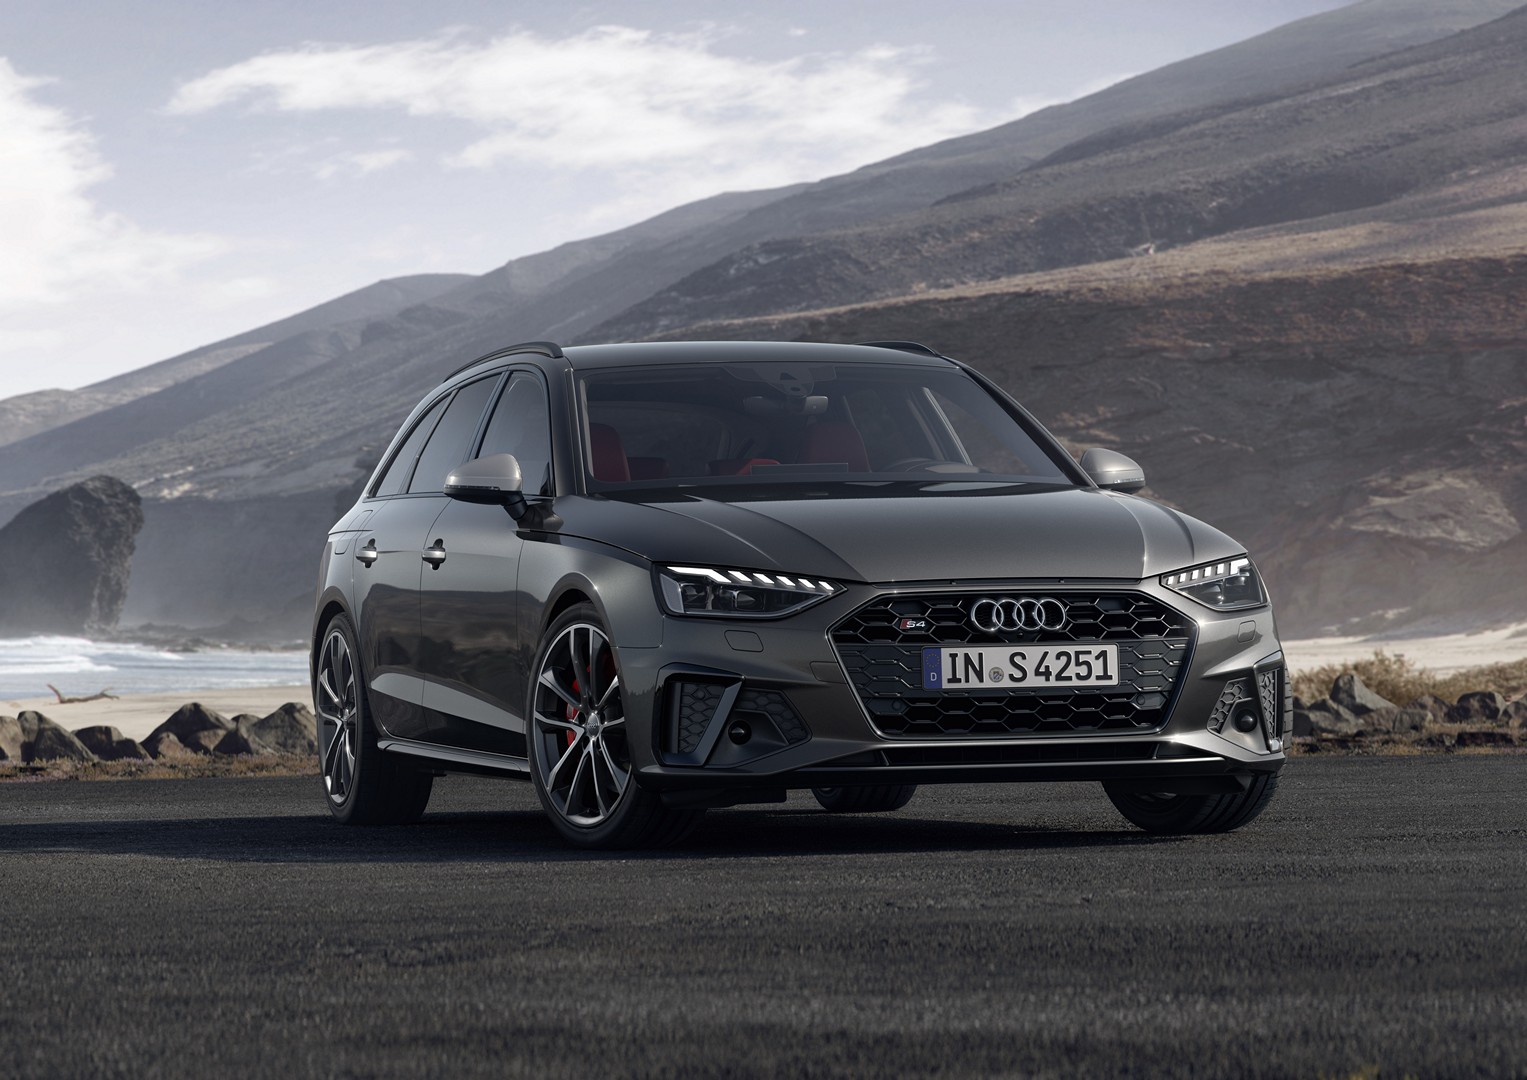 2020 Audi S4 and S4 Avant Debut With New Look, TDI Engines in Europe -  autoevolution